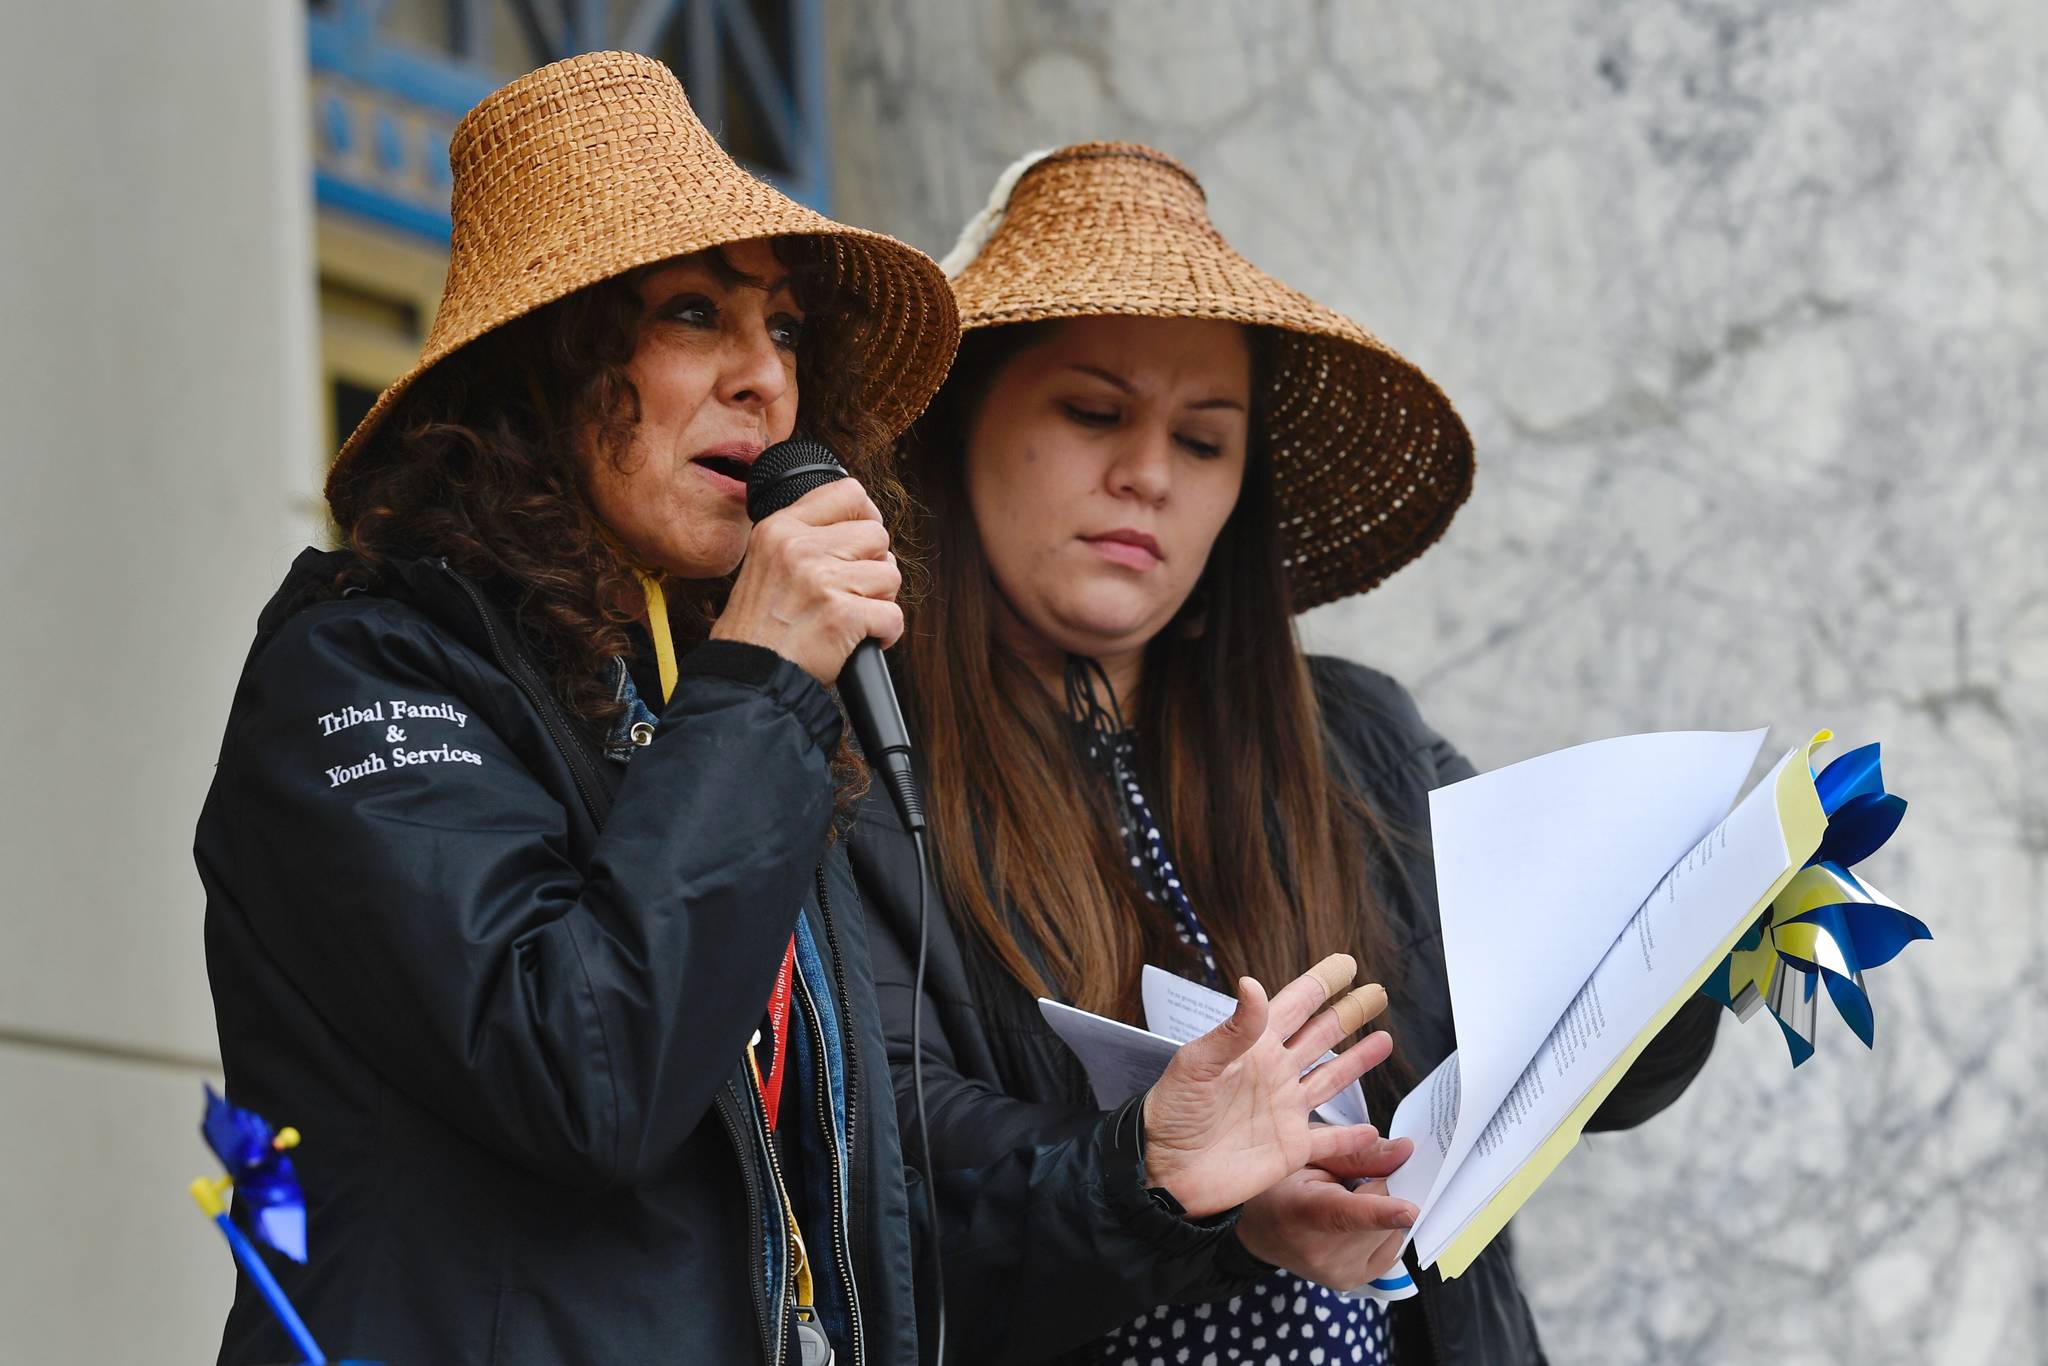 Amalia Monreal, Child and Family Clinician for the Central Council of the Tlingit and Haida Indian Tribes of Alaska, left, and Barbara Dude, Family Services Administrator, speak during a Go Blue Day Rally for National Child Abuse Prevention Month at the Capitol on Friday, April 5, 2019. (Michael Penn | Juneau Empire)